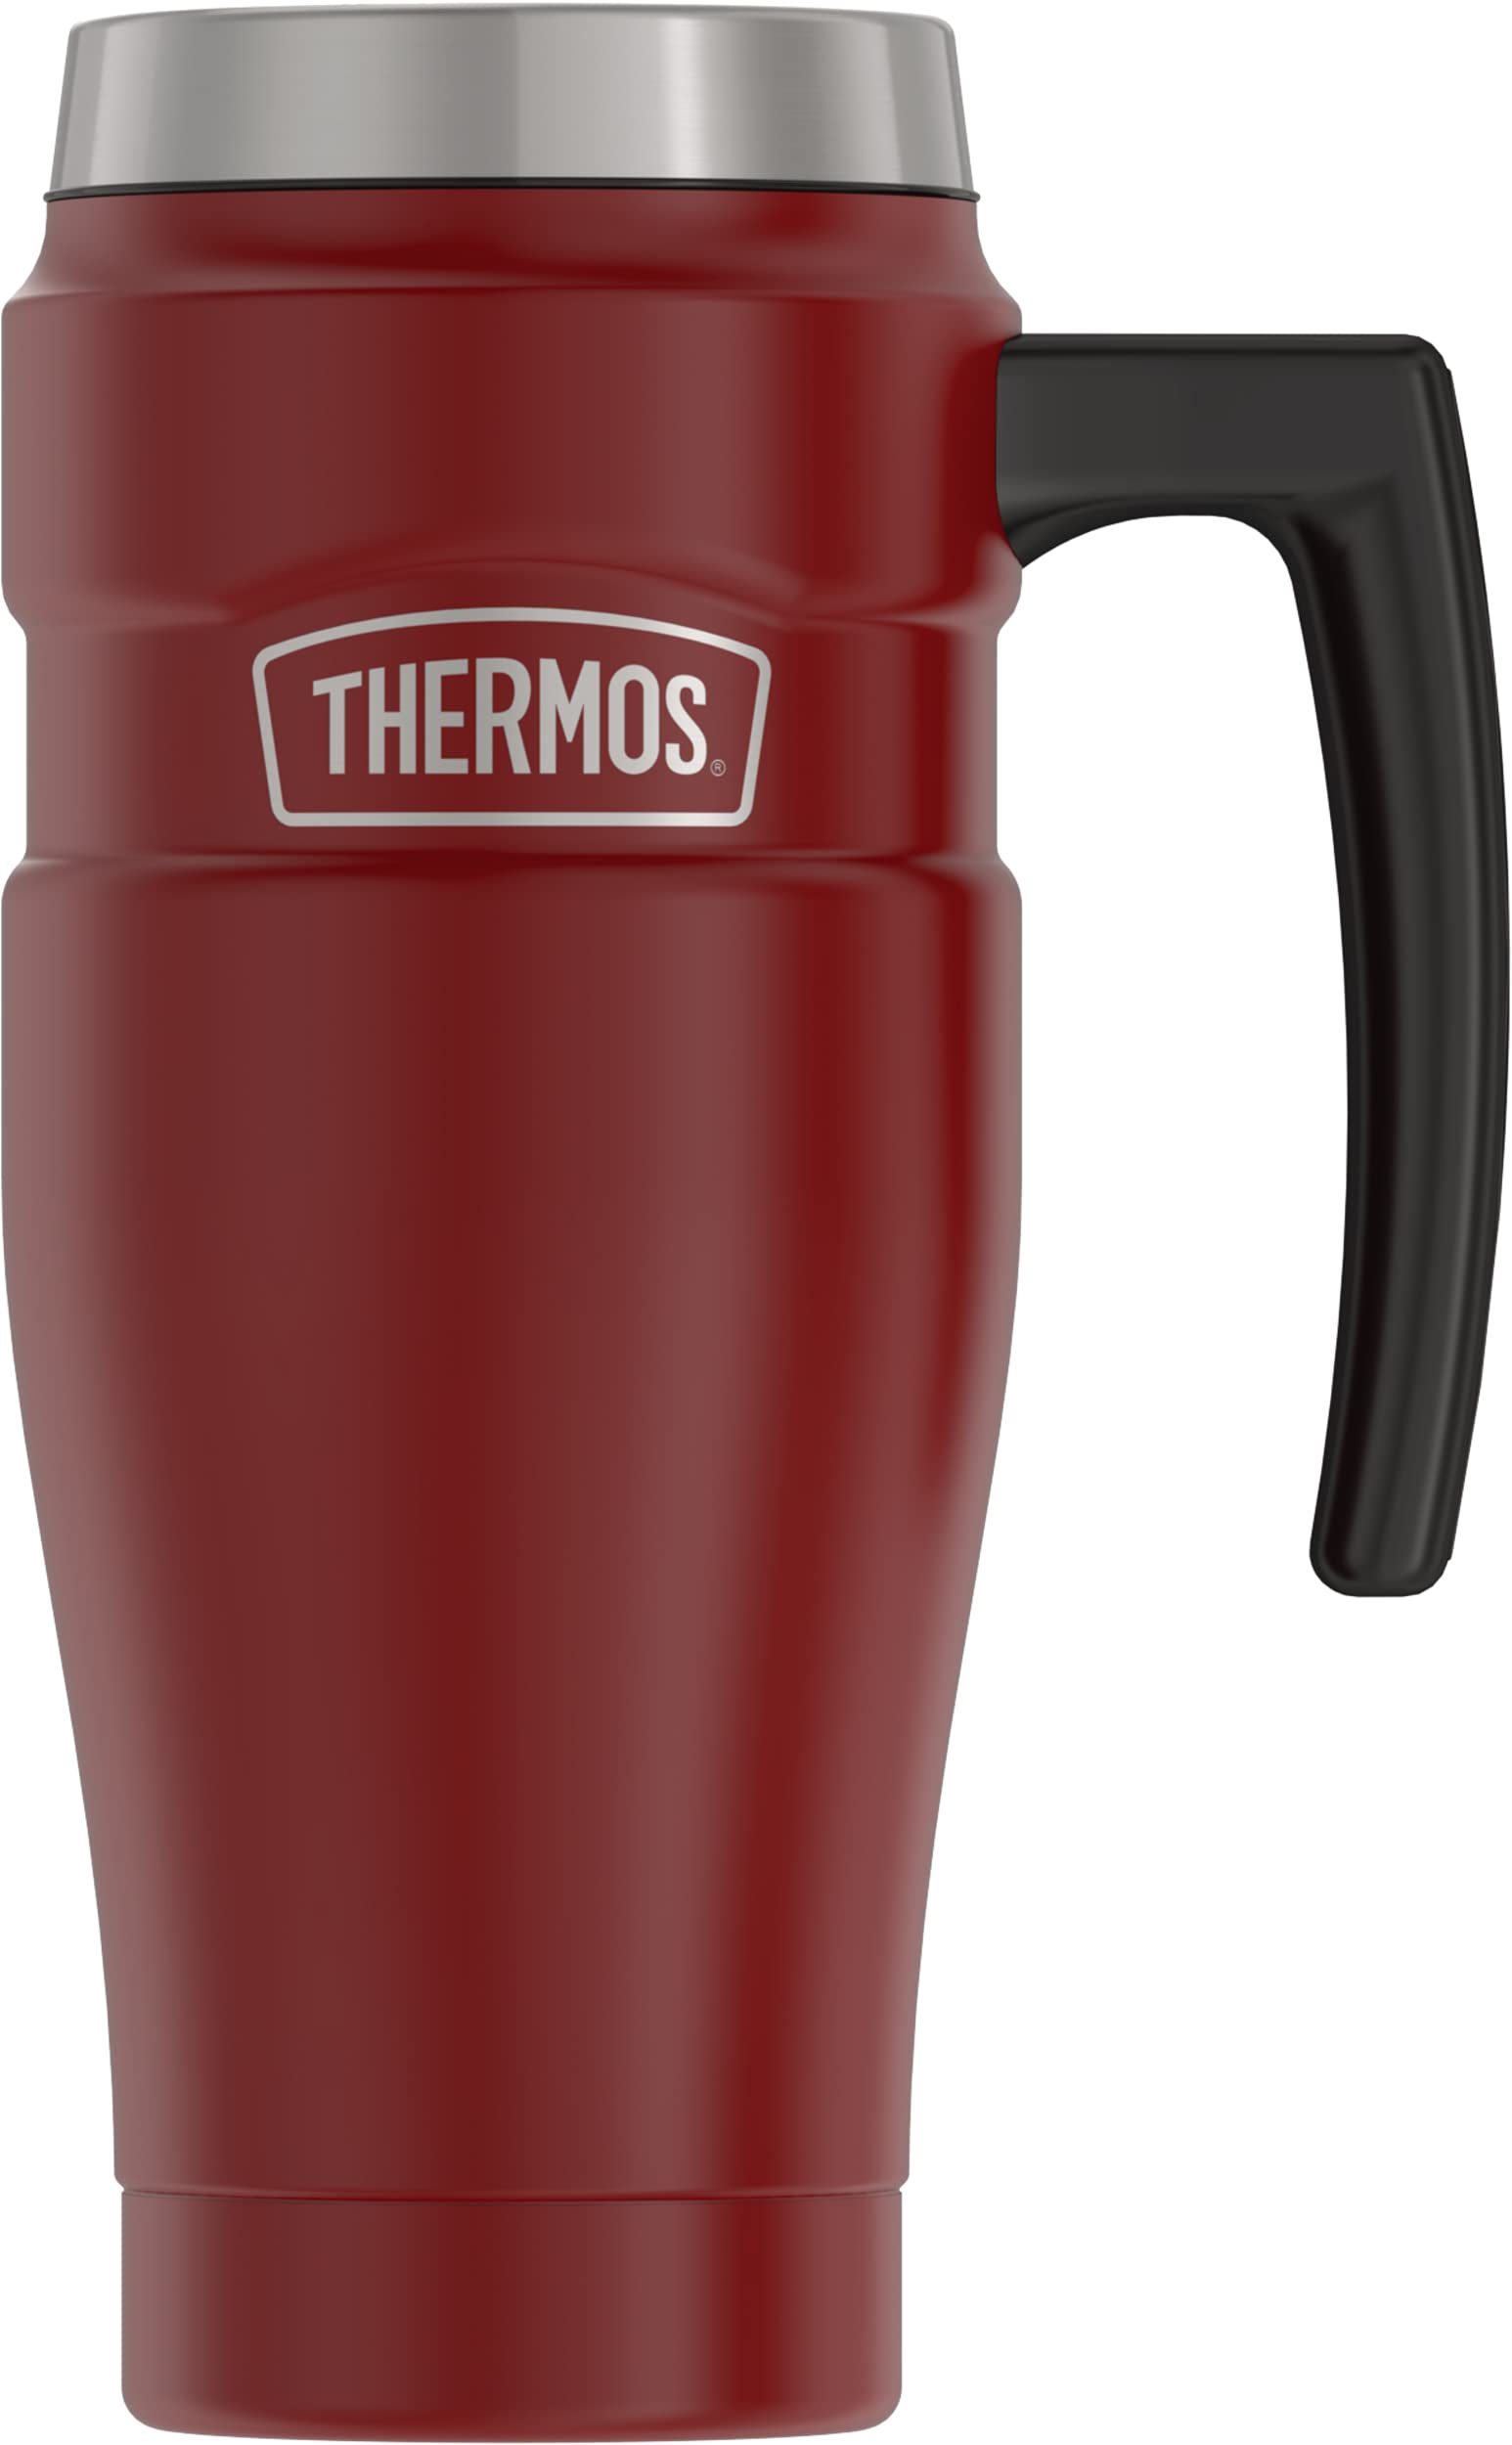 THERMOS Stainless King Vacuum-Insulated Travel Mug, 16 Ounce, Rustic Red Stainless King Vacuum-Insulated Beverage Bottle, 40 Ounce, Rustic Red Bundle